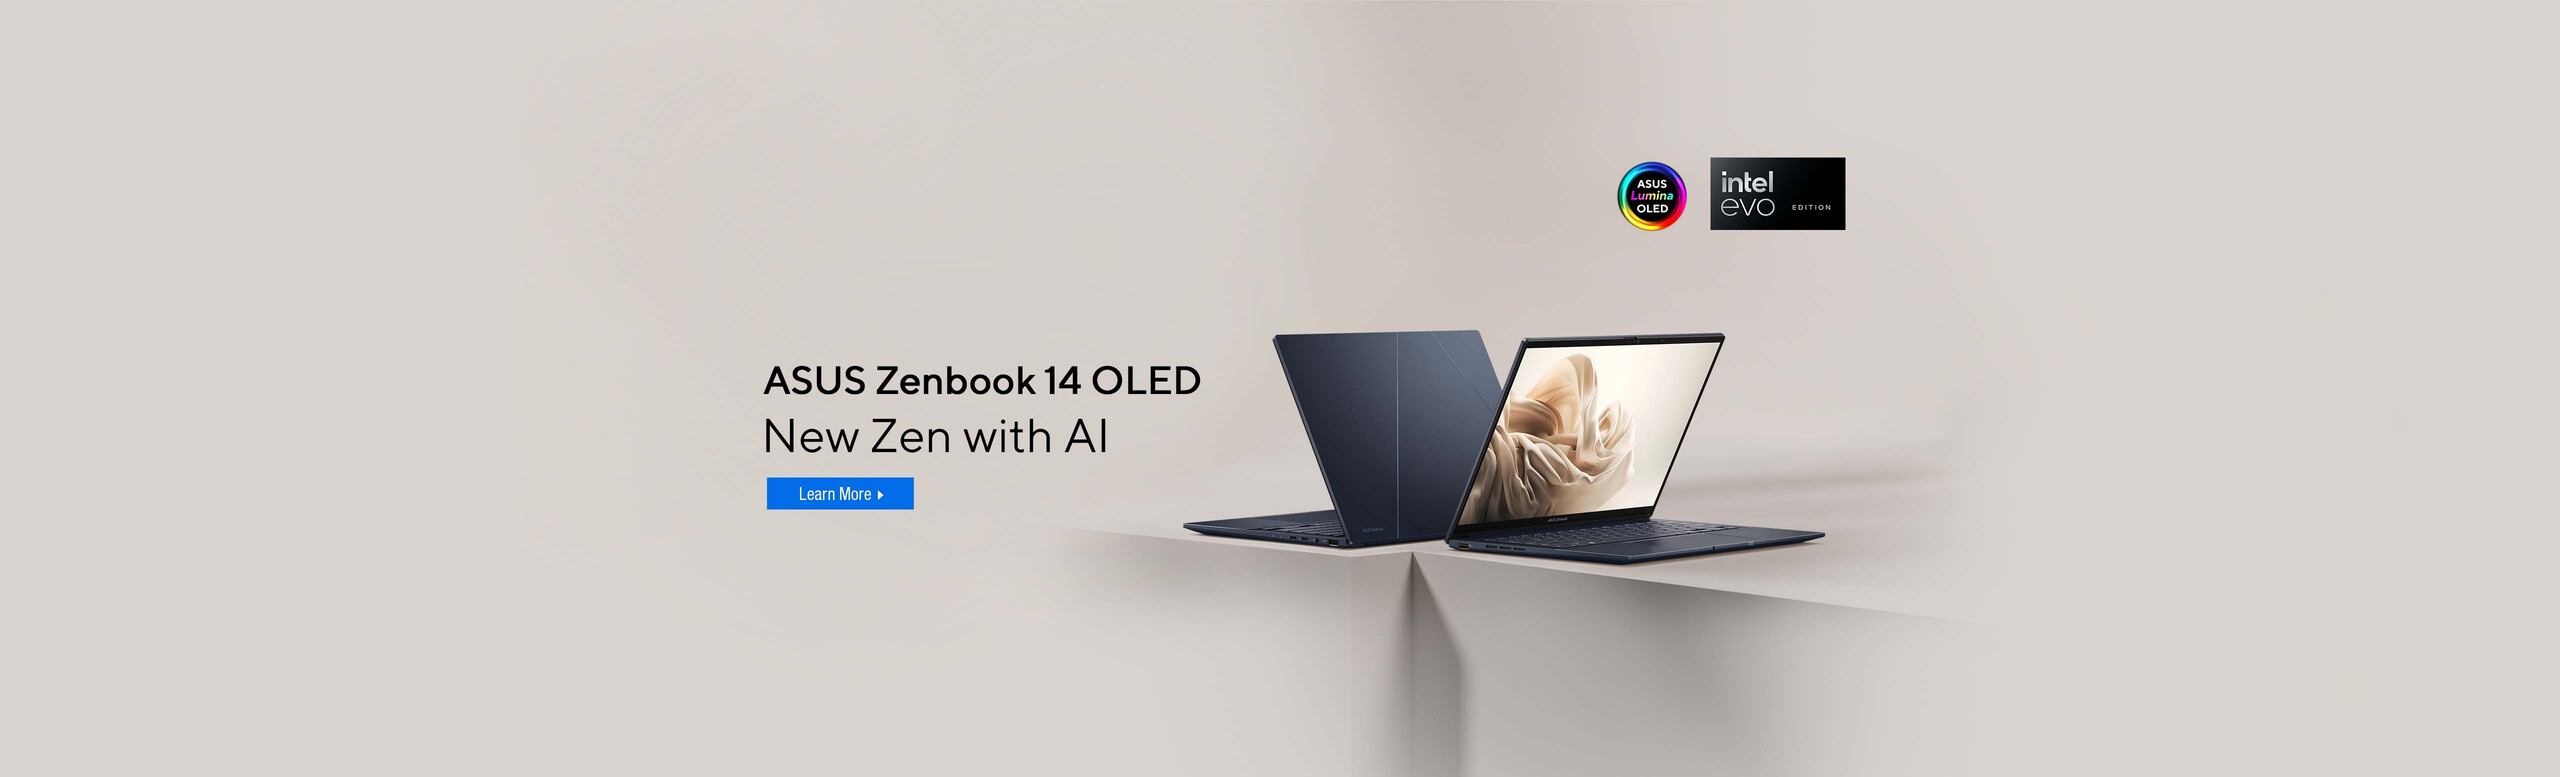 Zenbook 14 OLED Image of 2 laptops  New Zen with AI